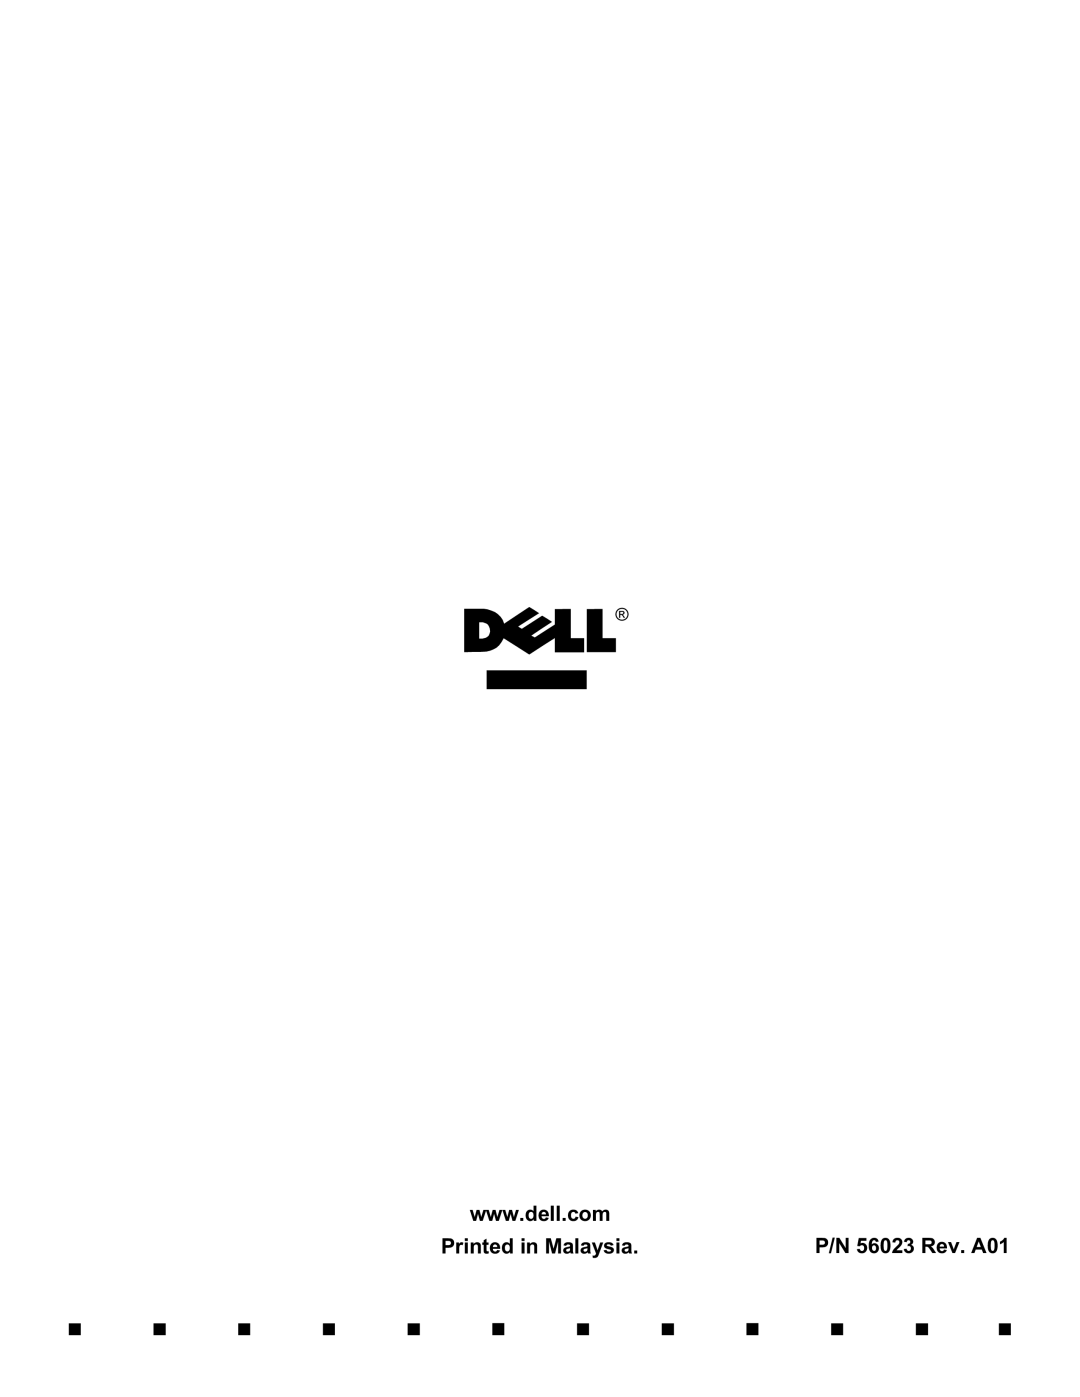 Dell GN manual ZZZGHOOFRP 3ULQWHGLQ0DOD\VLD315HY$ 